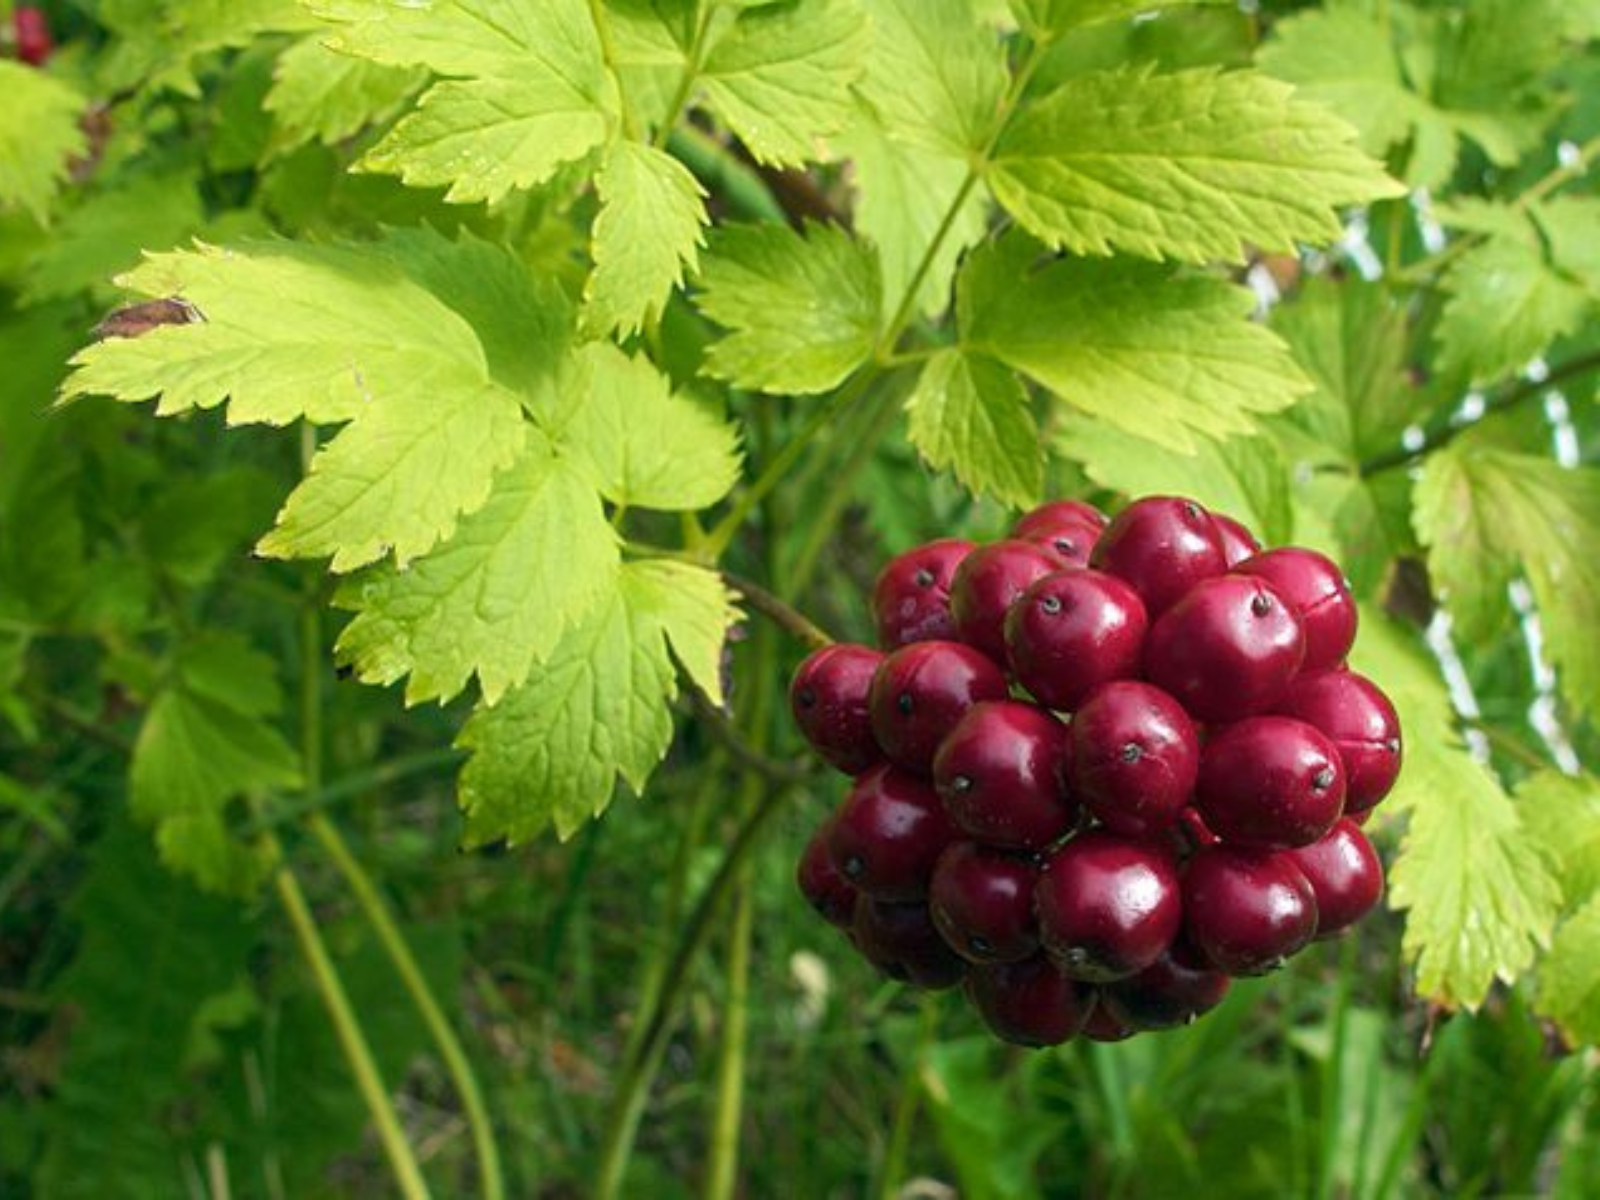 A berry consisting of red drupes growing low to the ground among green leaves.